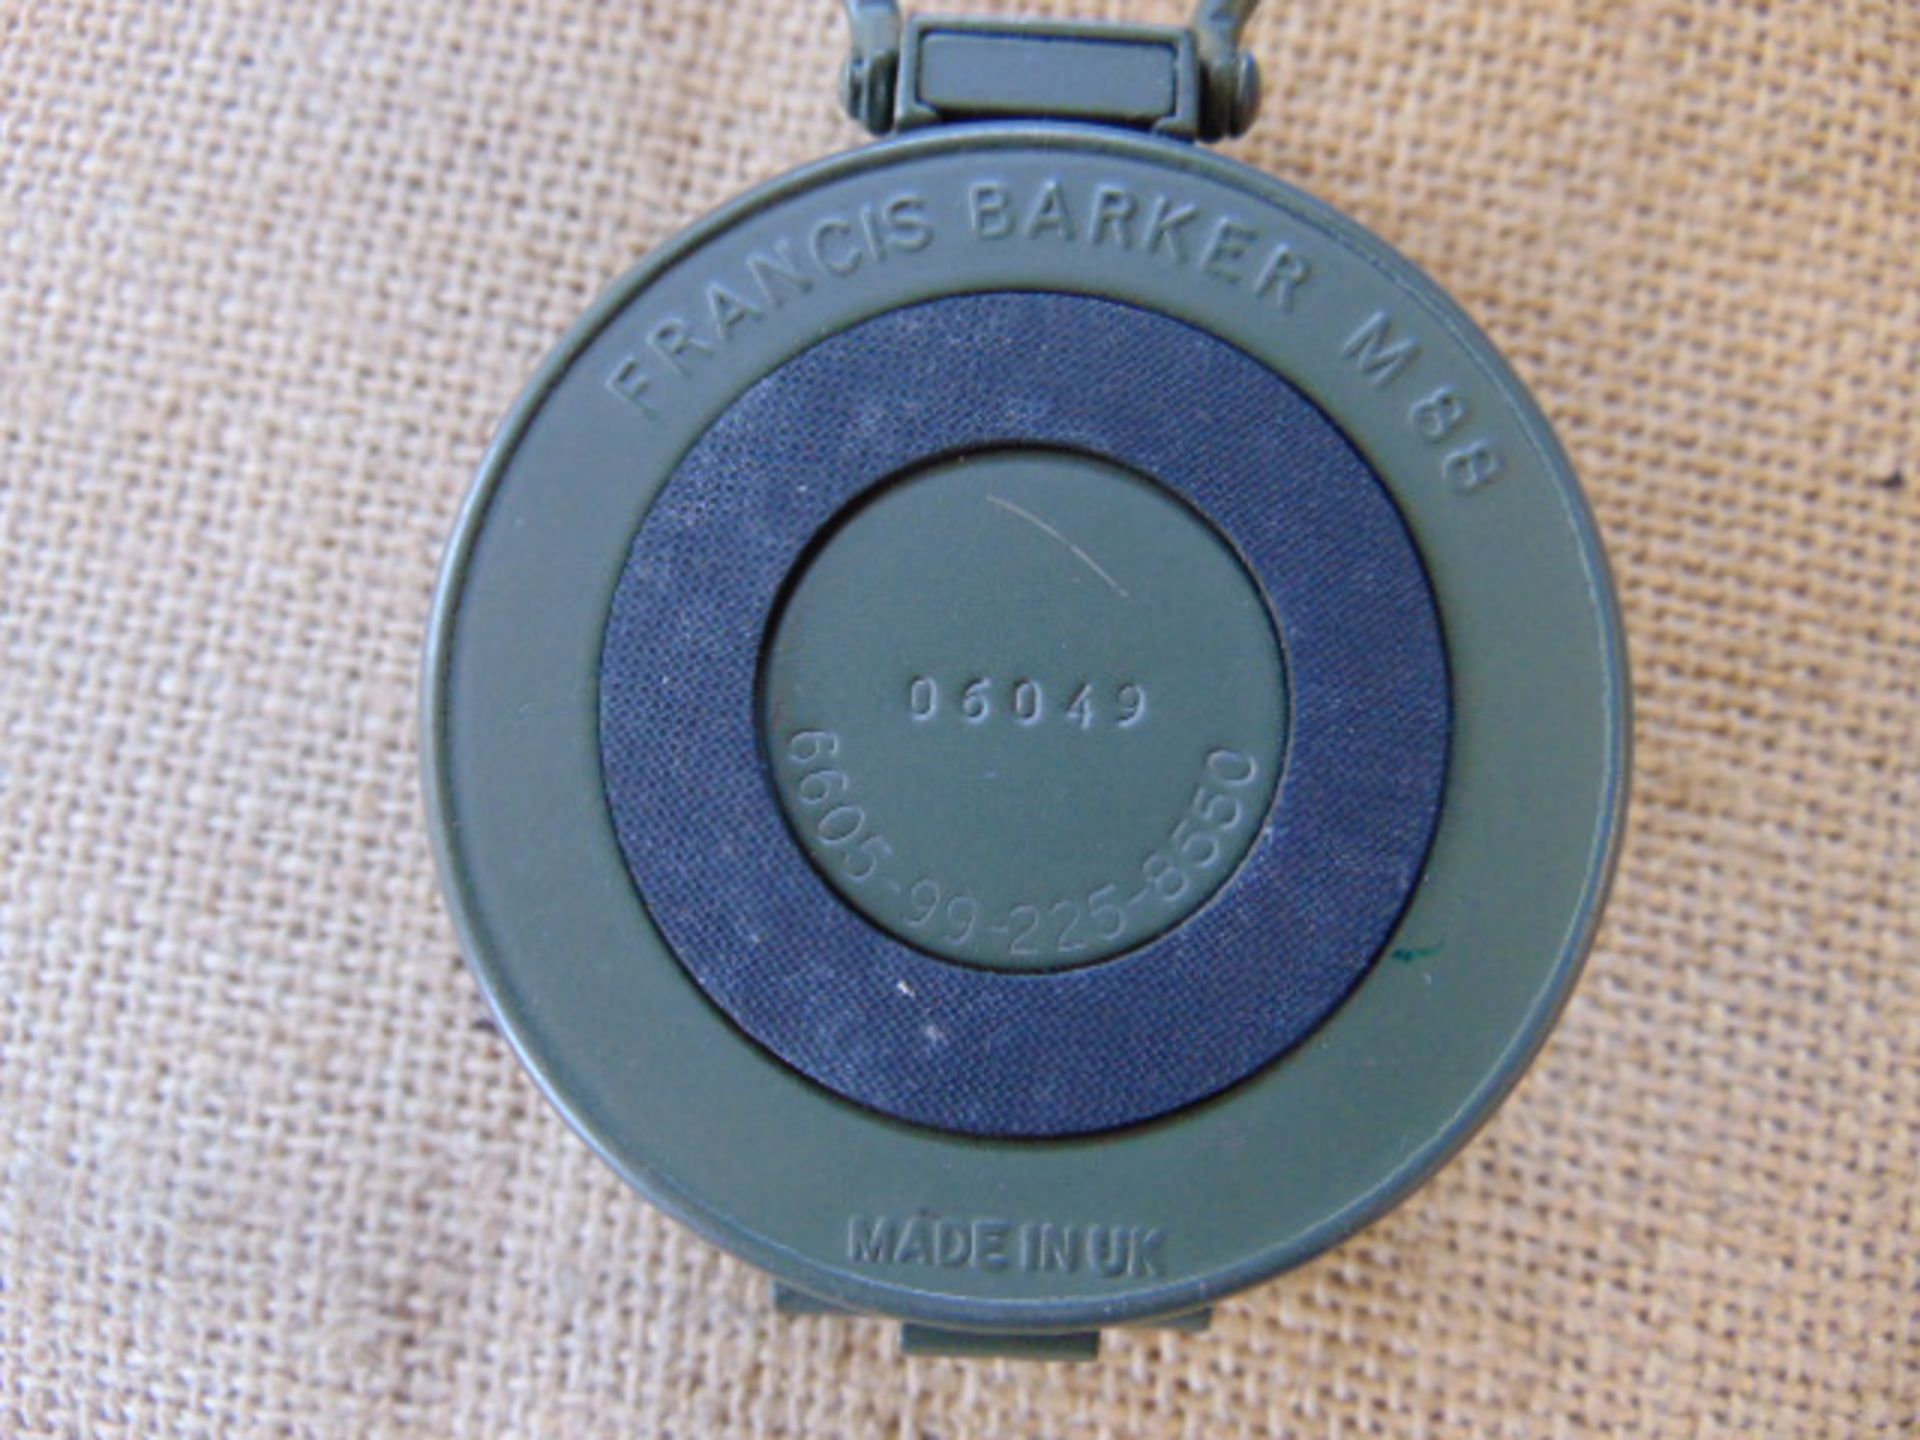 Unissued Genuine British Army Francis Barker M88 Prismatic Marching Compass - Image 4 of 5